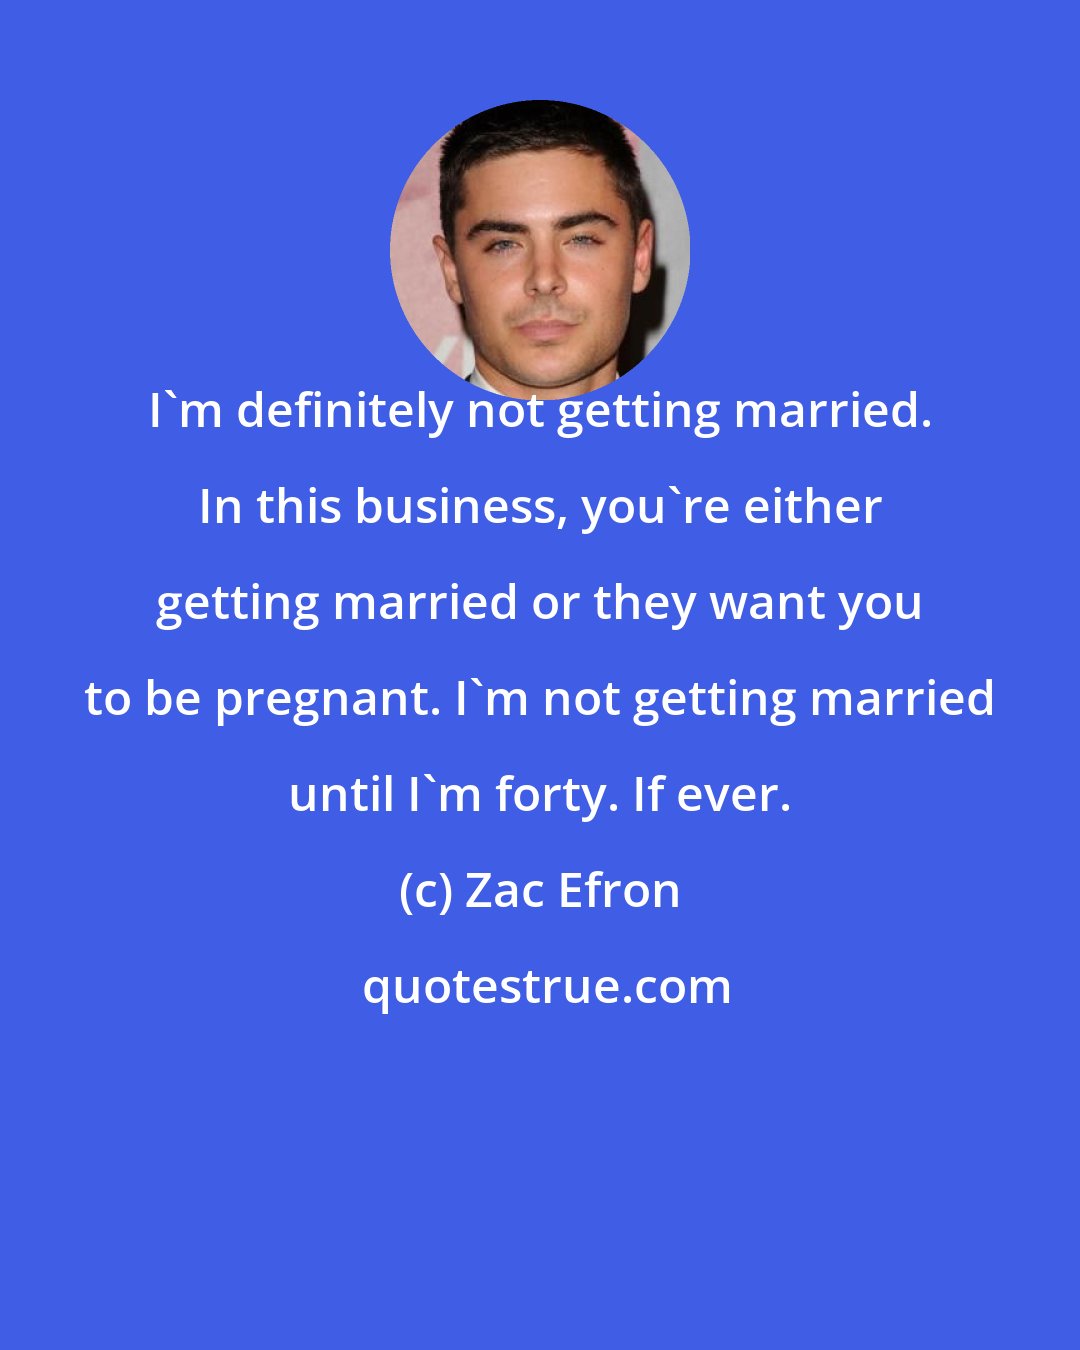 Zac Efron: I'm definitely not getting married. In this business, you're either getting married or they want you to be pregnant. I'm not getting married until I'm forty. If ever.